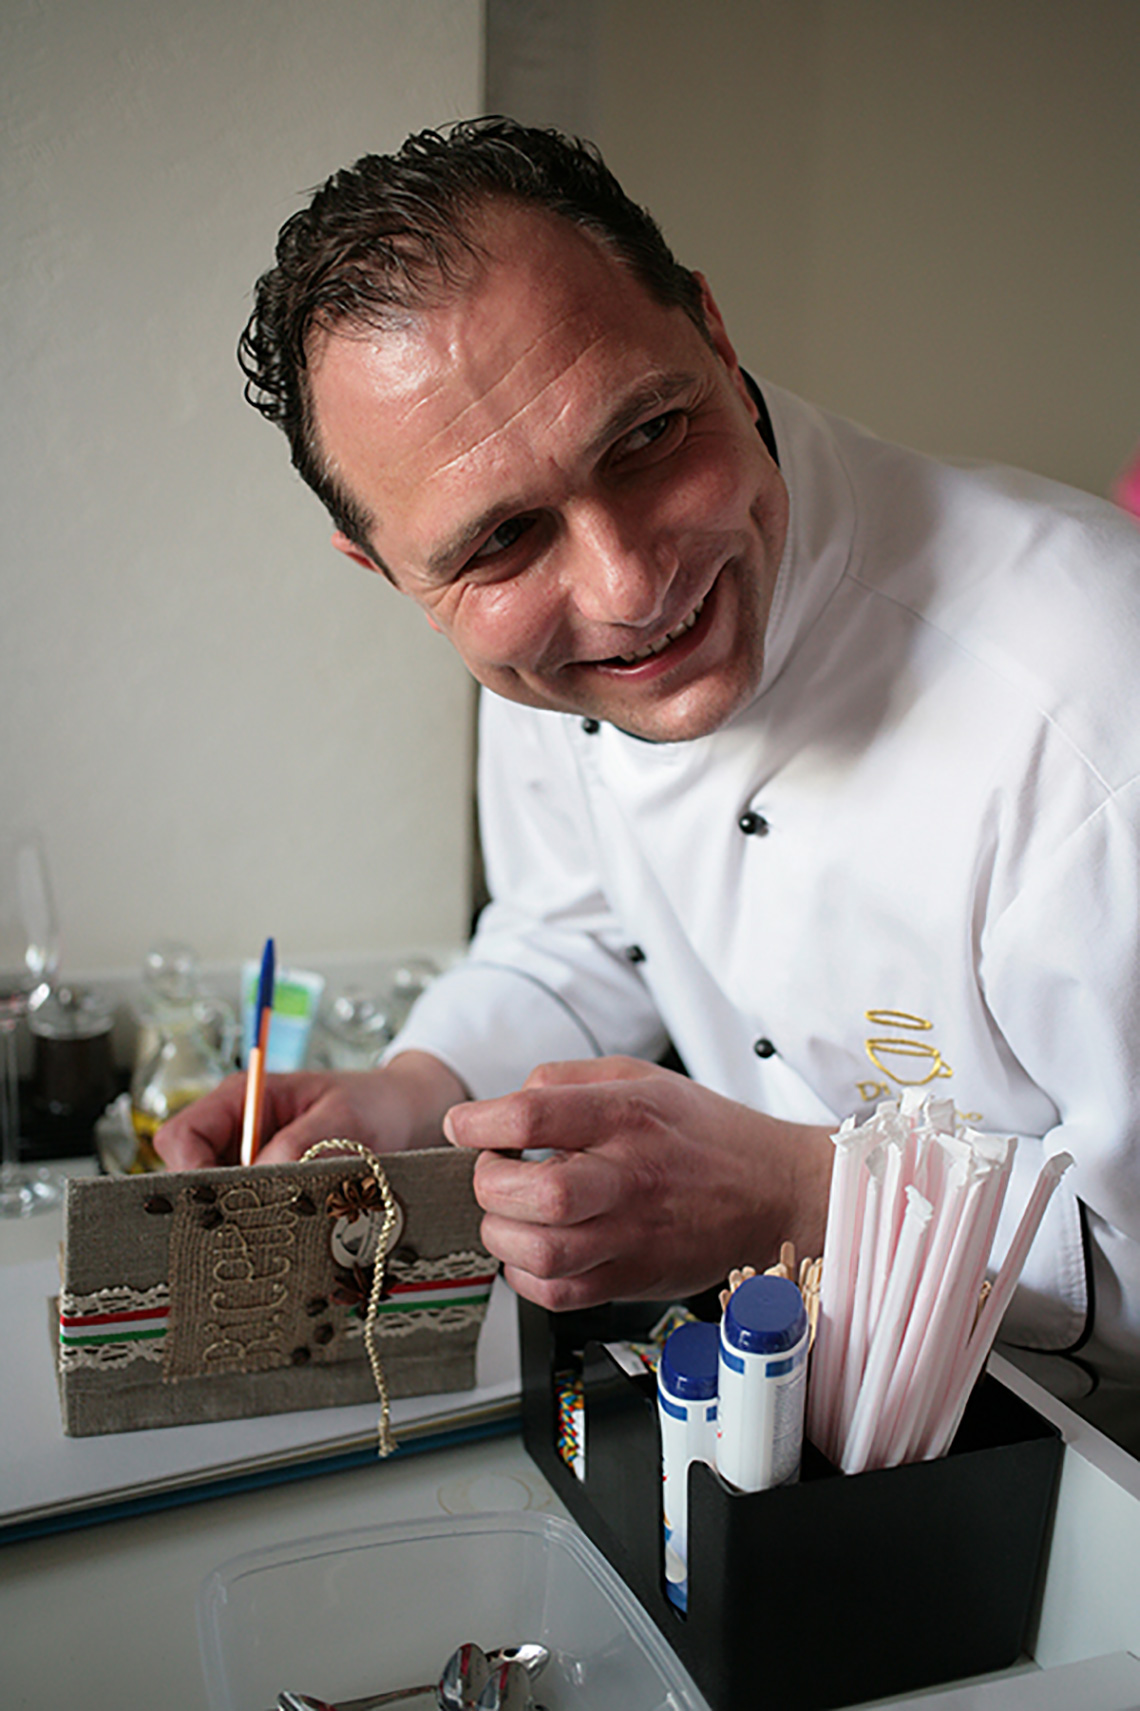 Chef Ivan Pilipenko. Course "Culinary Traditions of Northern Italy". Cooking school in Ukraine.